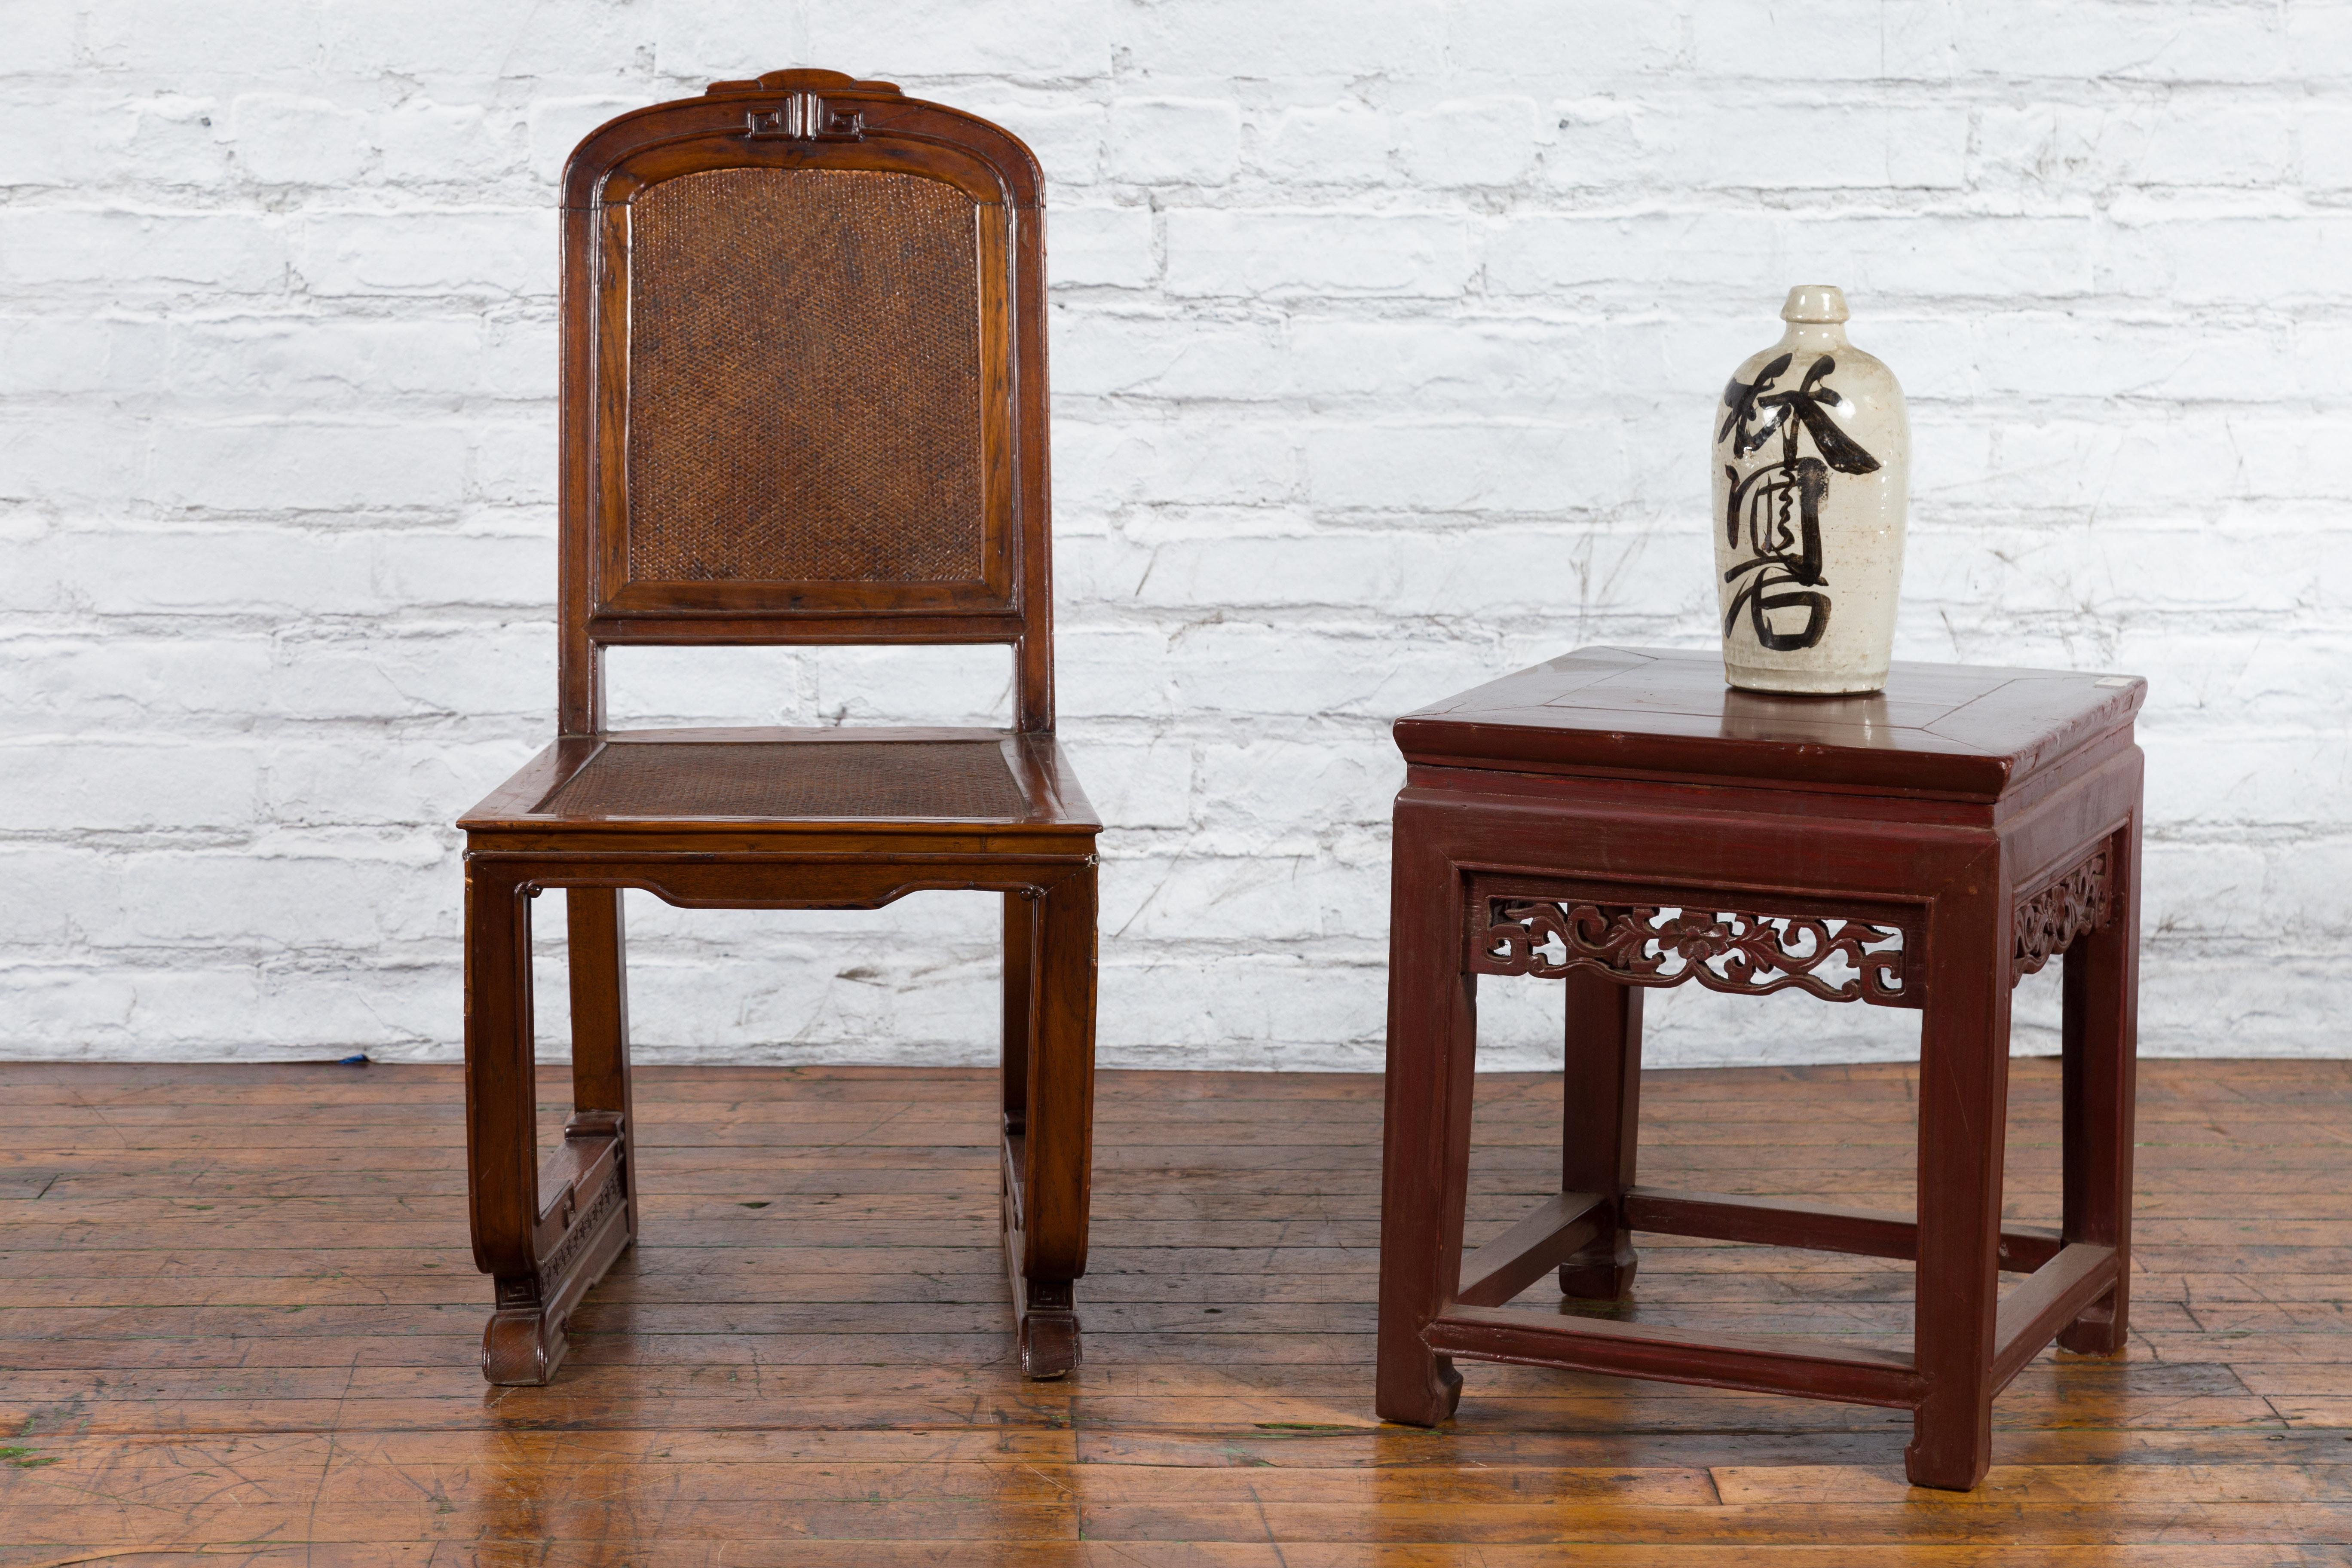 Chinese Qing Dynasty Period 19th Century Wooden Side Chair with Rattan Accents In Good Condition For Sale In Yonkers, NY